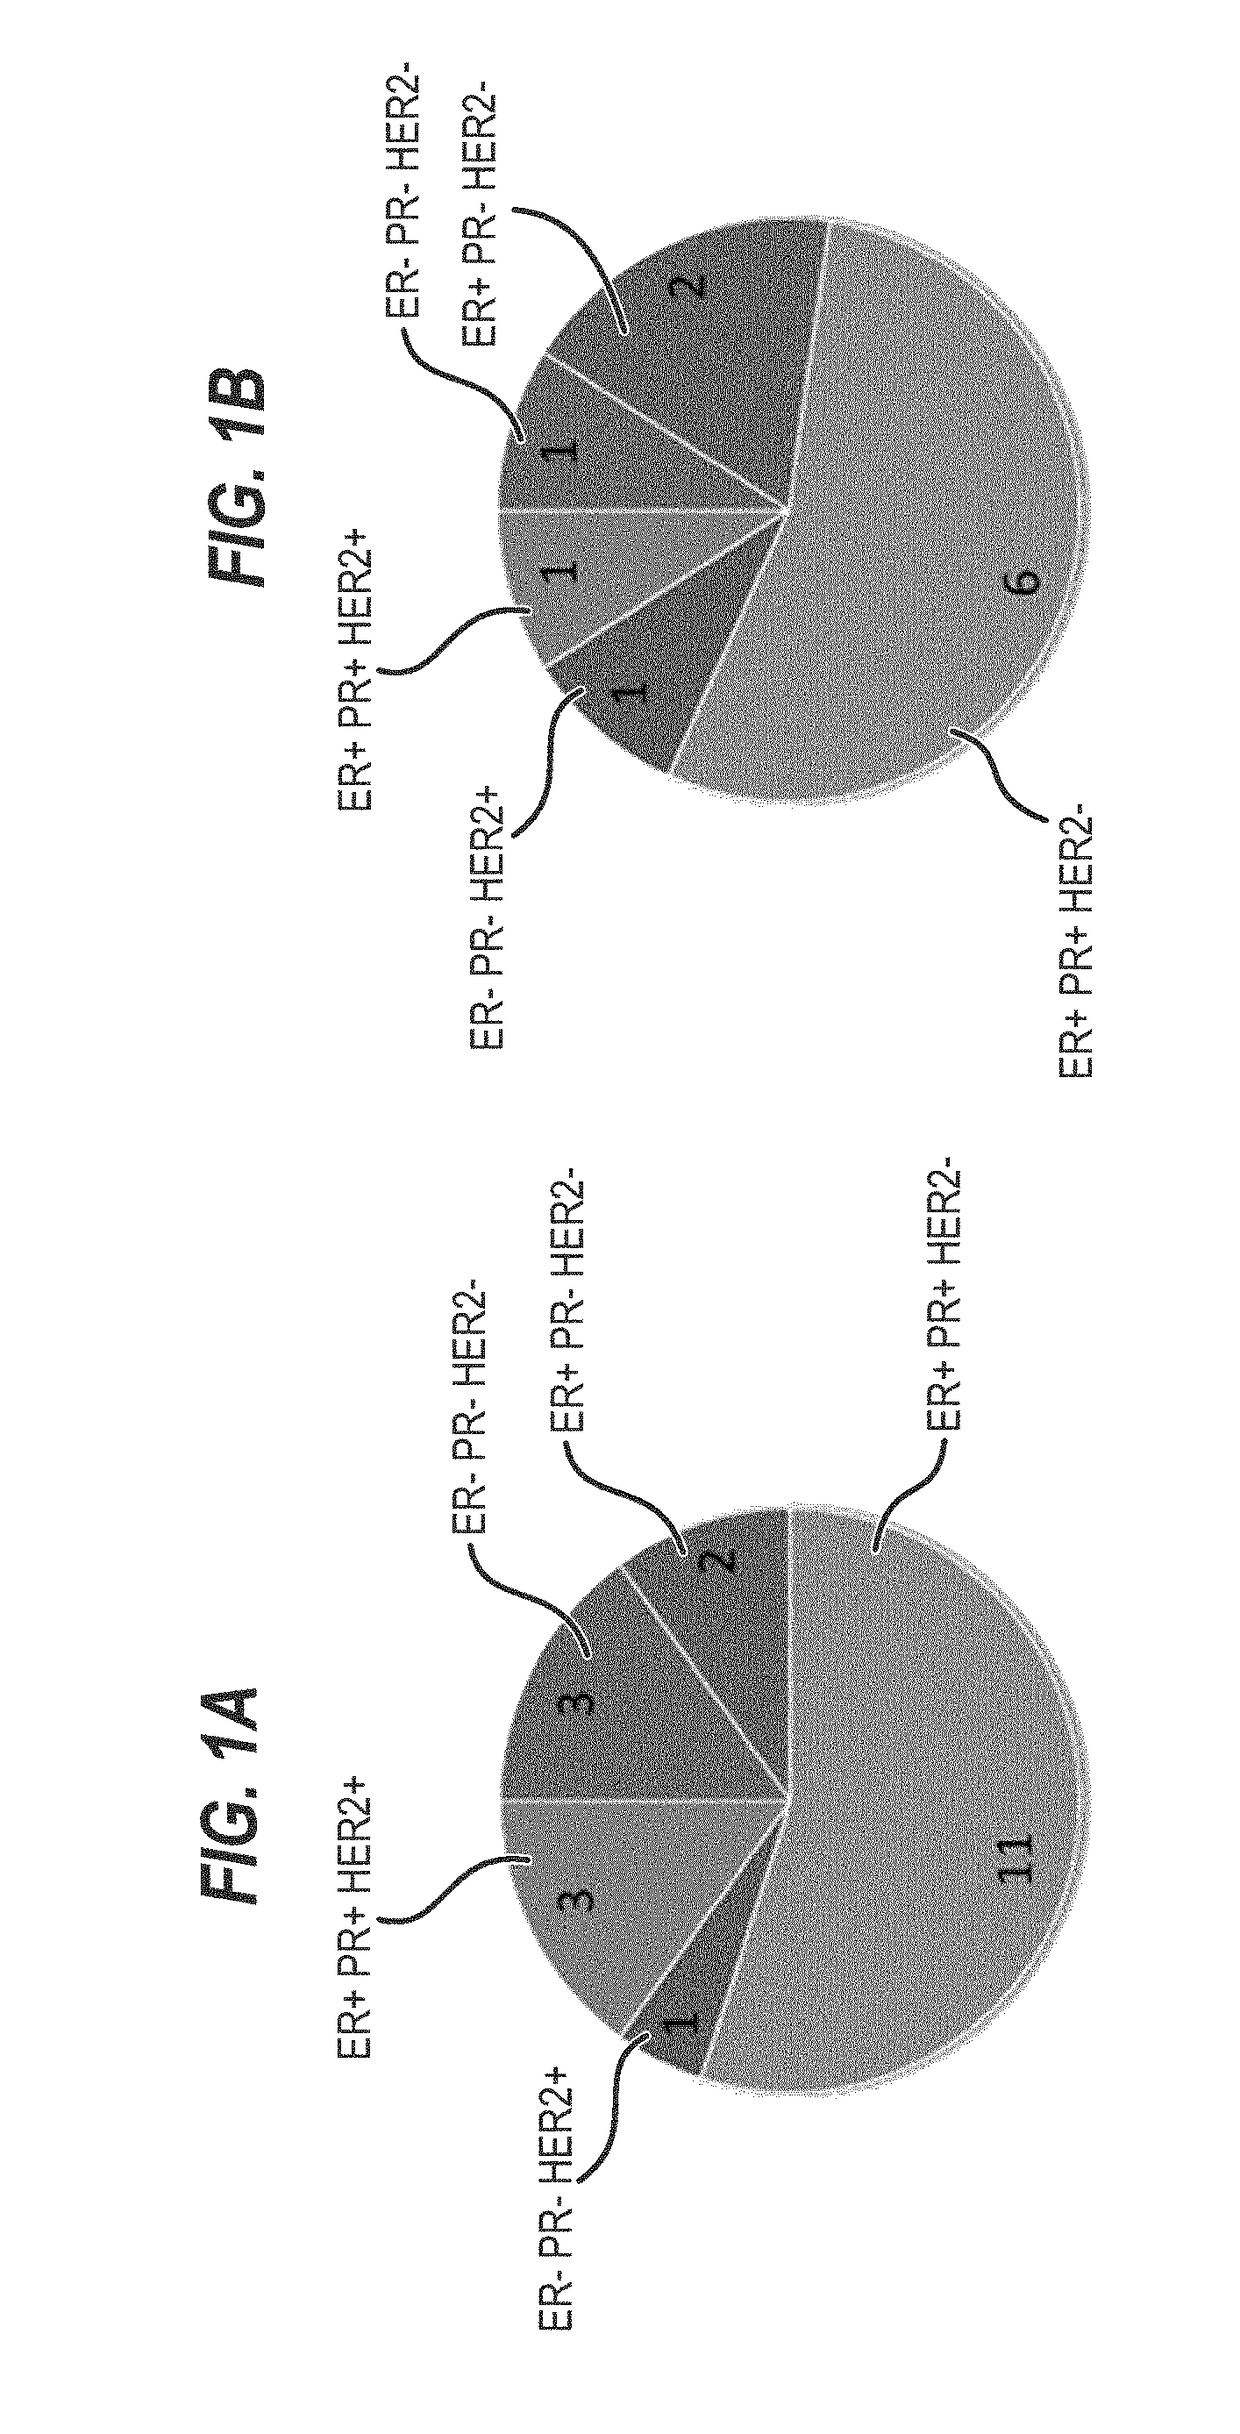 Culture medium for expanding breast epithelial stem cells